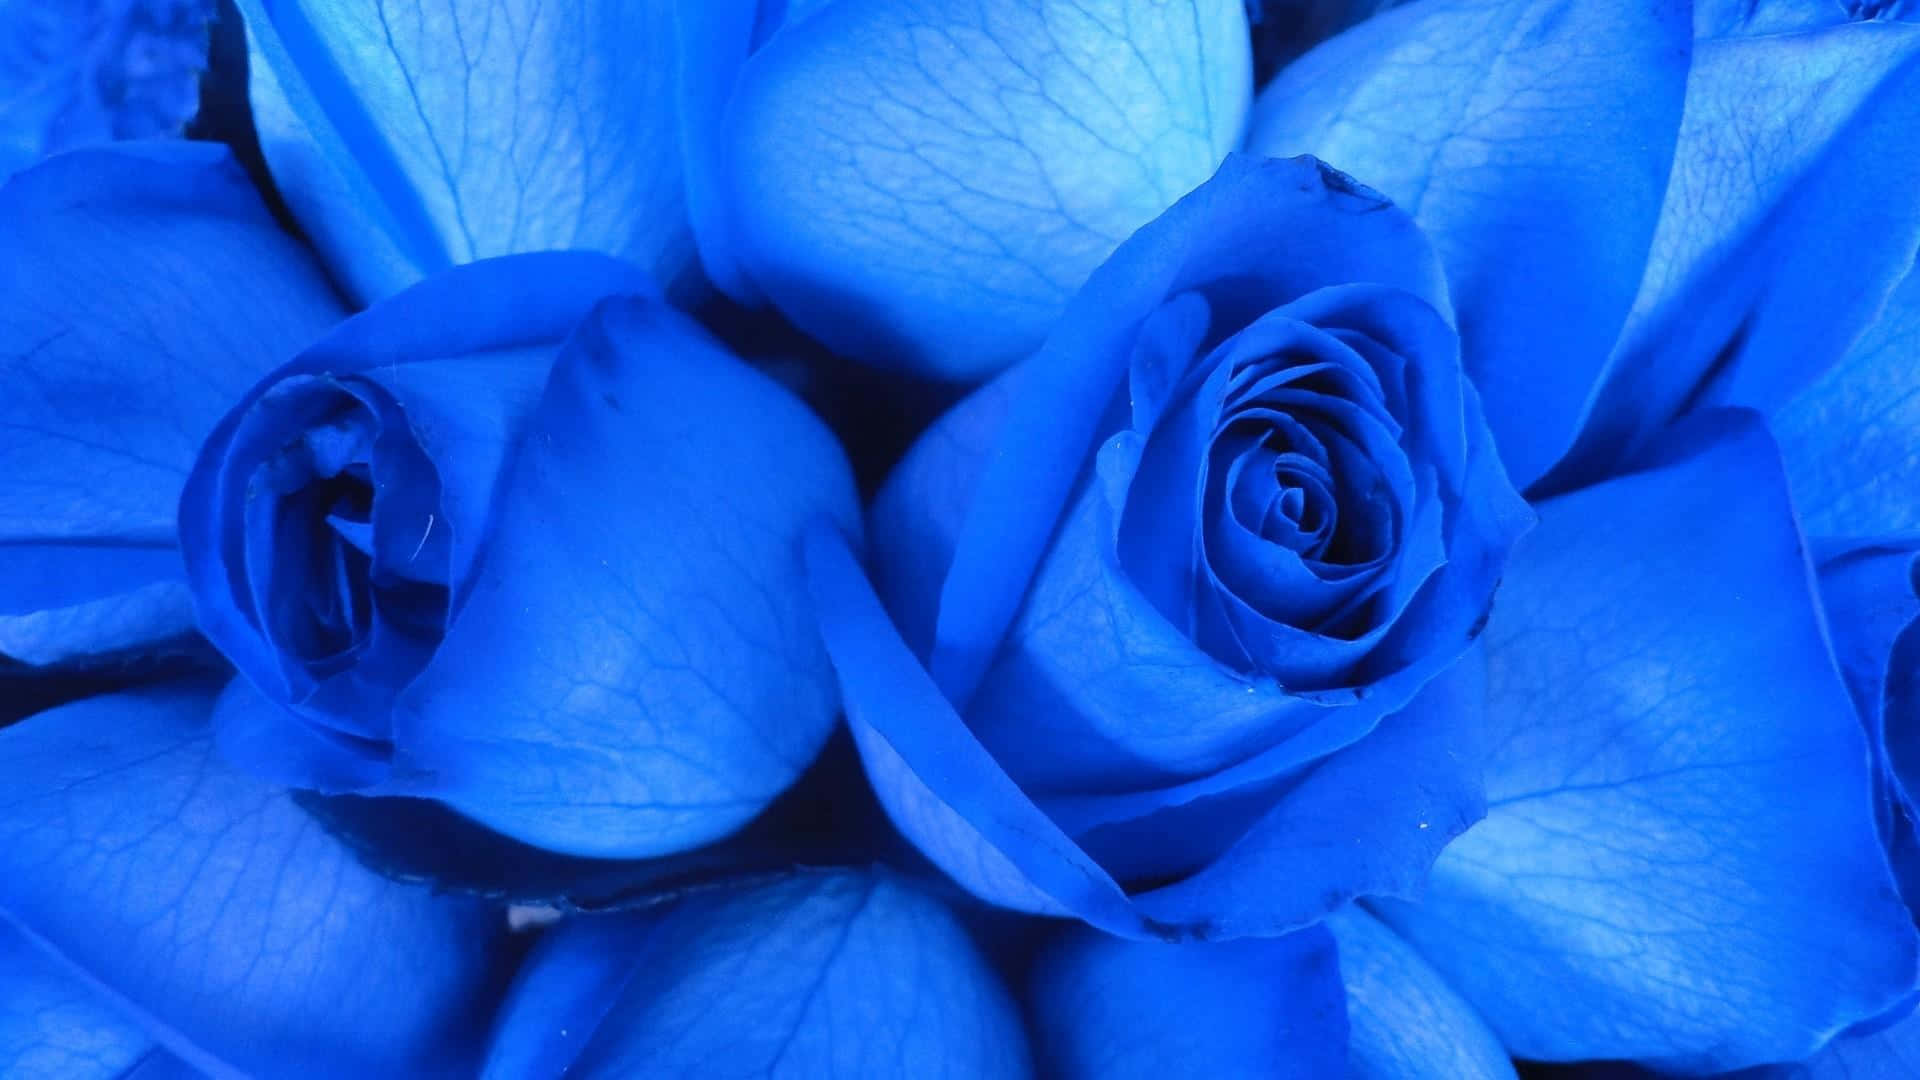 Get Lost In A Dreamlike World With The Beauty Of A Blue Rose